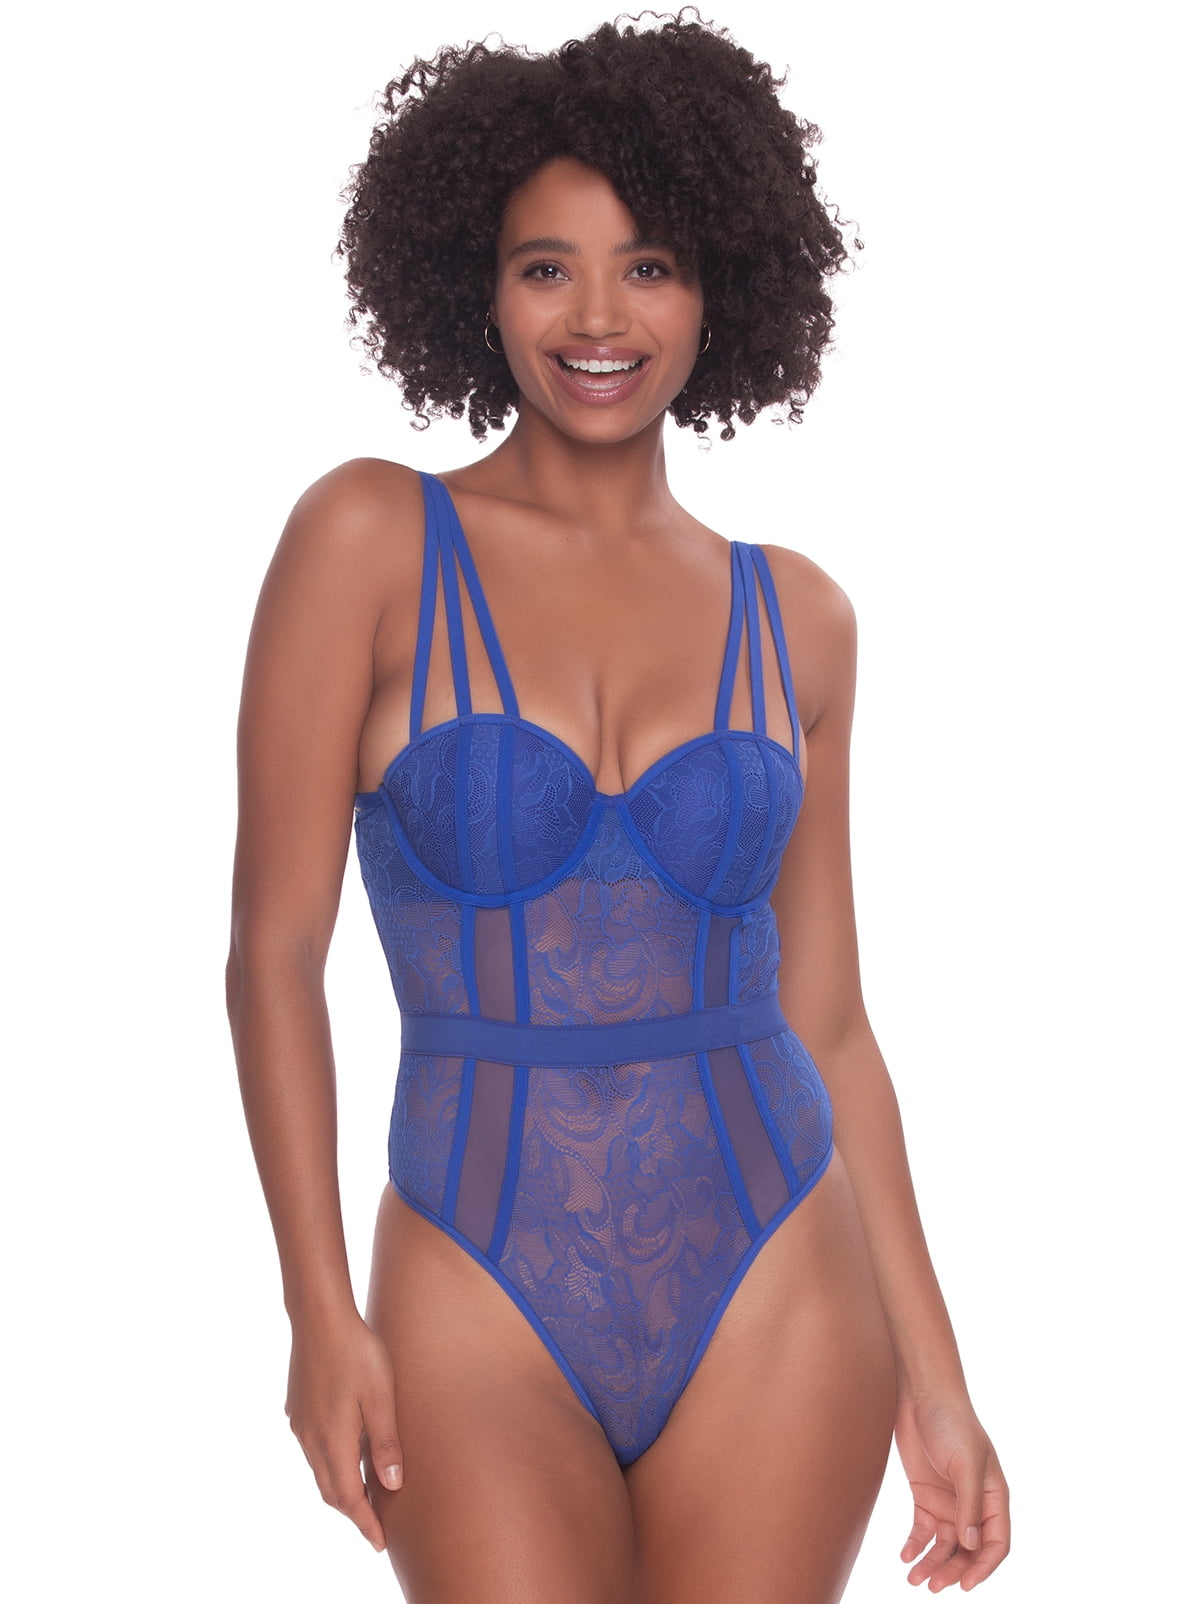 Callie Blush Underwired Stretch Lace Thong Bodysuit